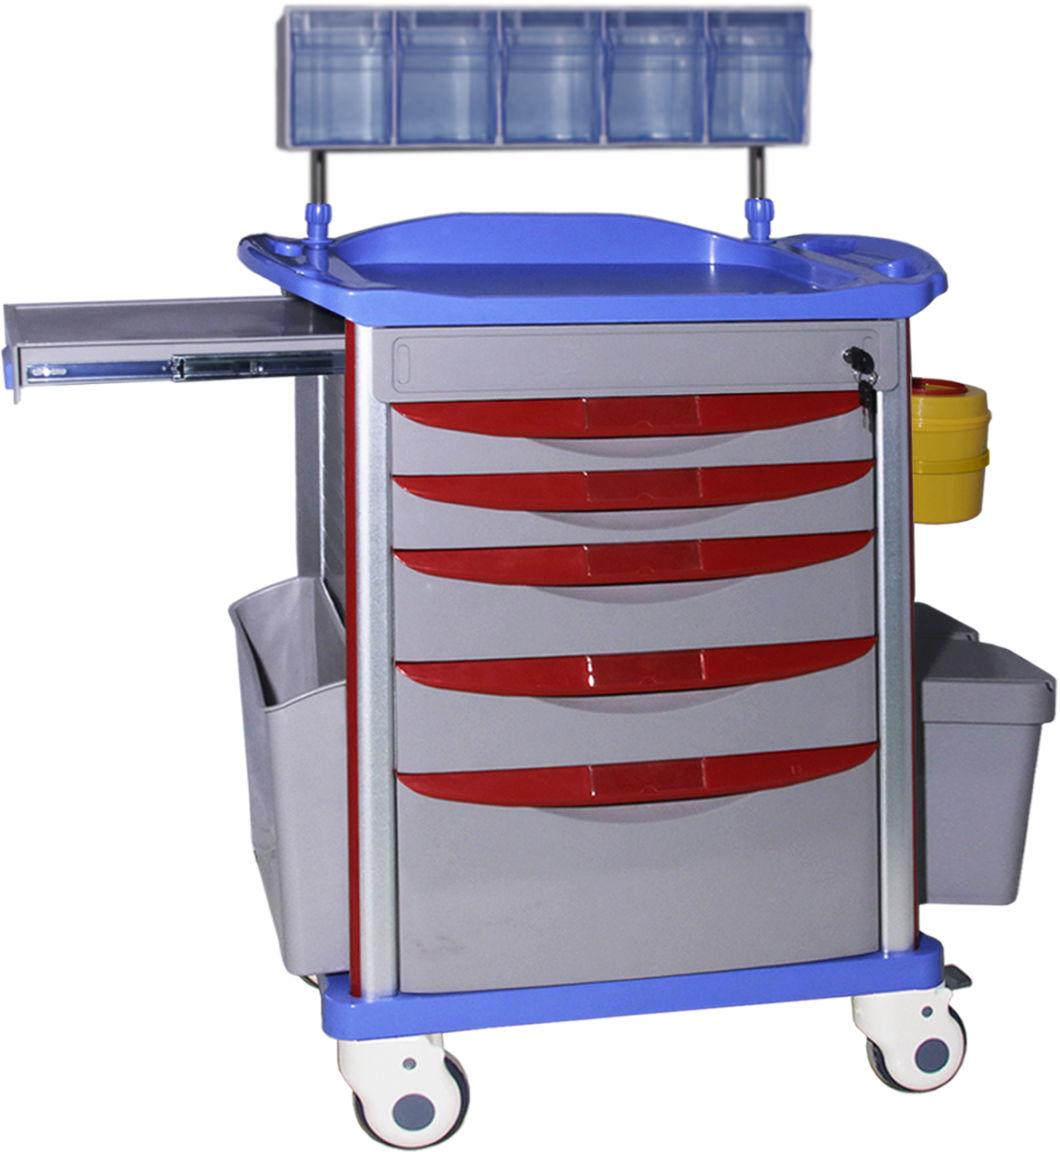 Mn-AC003 High Quality Hospital Medical Steel and Plastic Luxury Anesthesia Cart